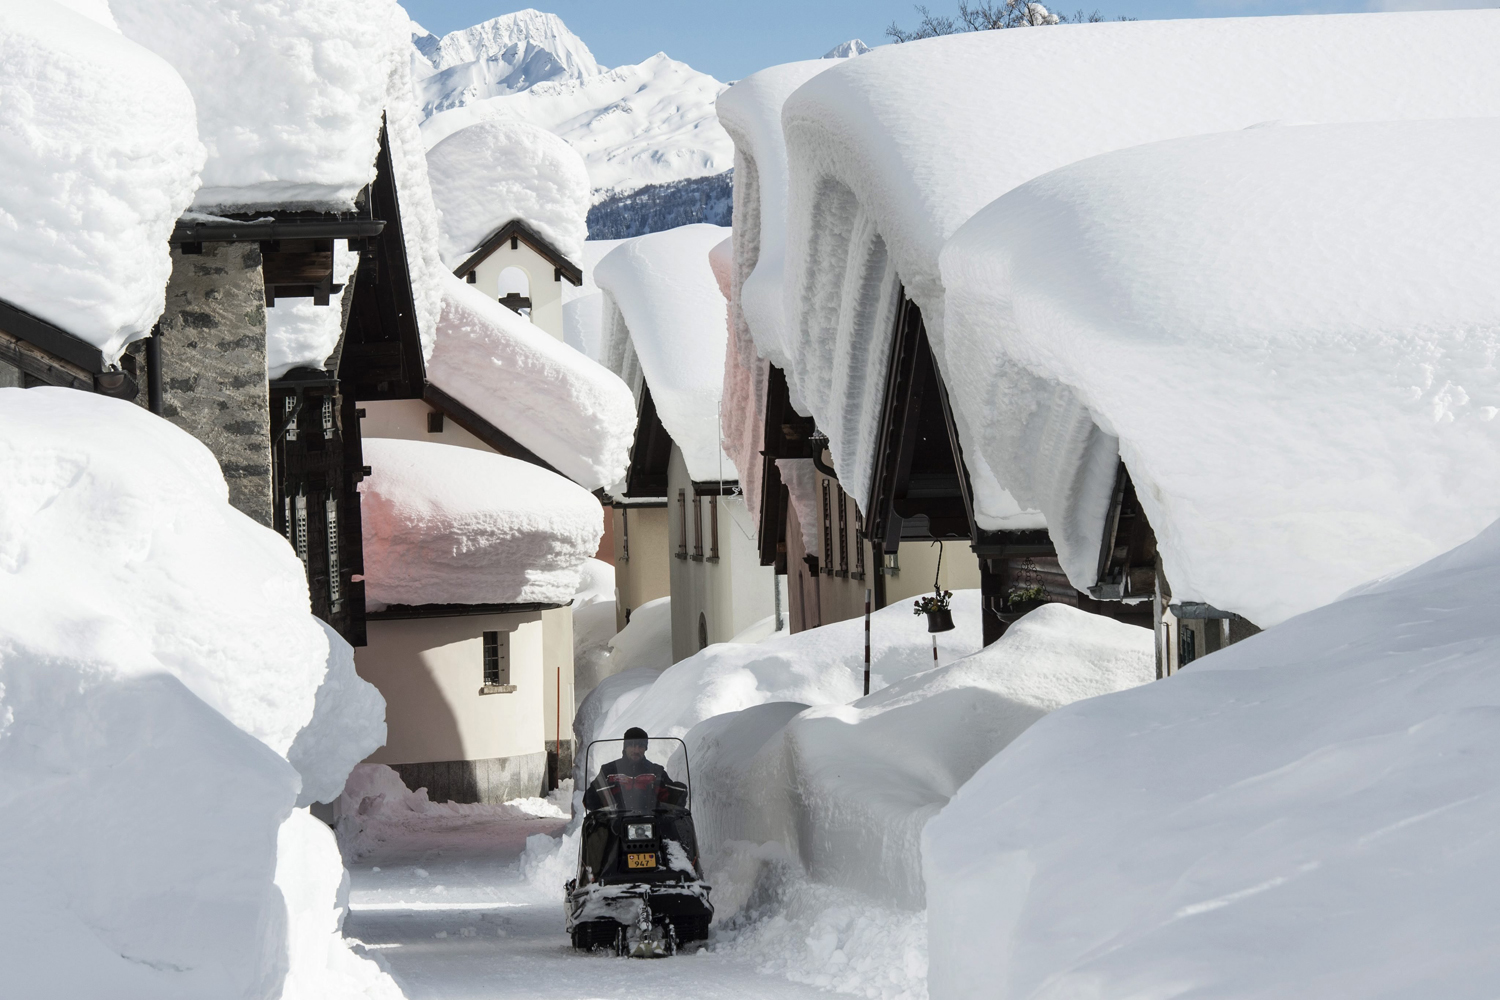 Feb. 9, 2014. Snow masses pile up on the rooftops of the village of Bedretto, Switzerland.